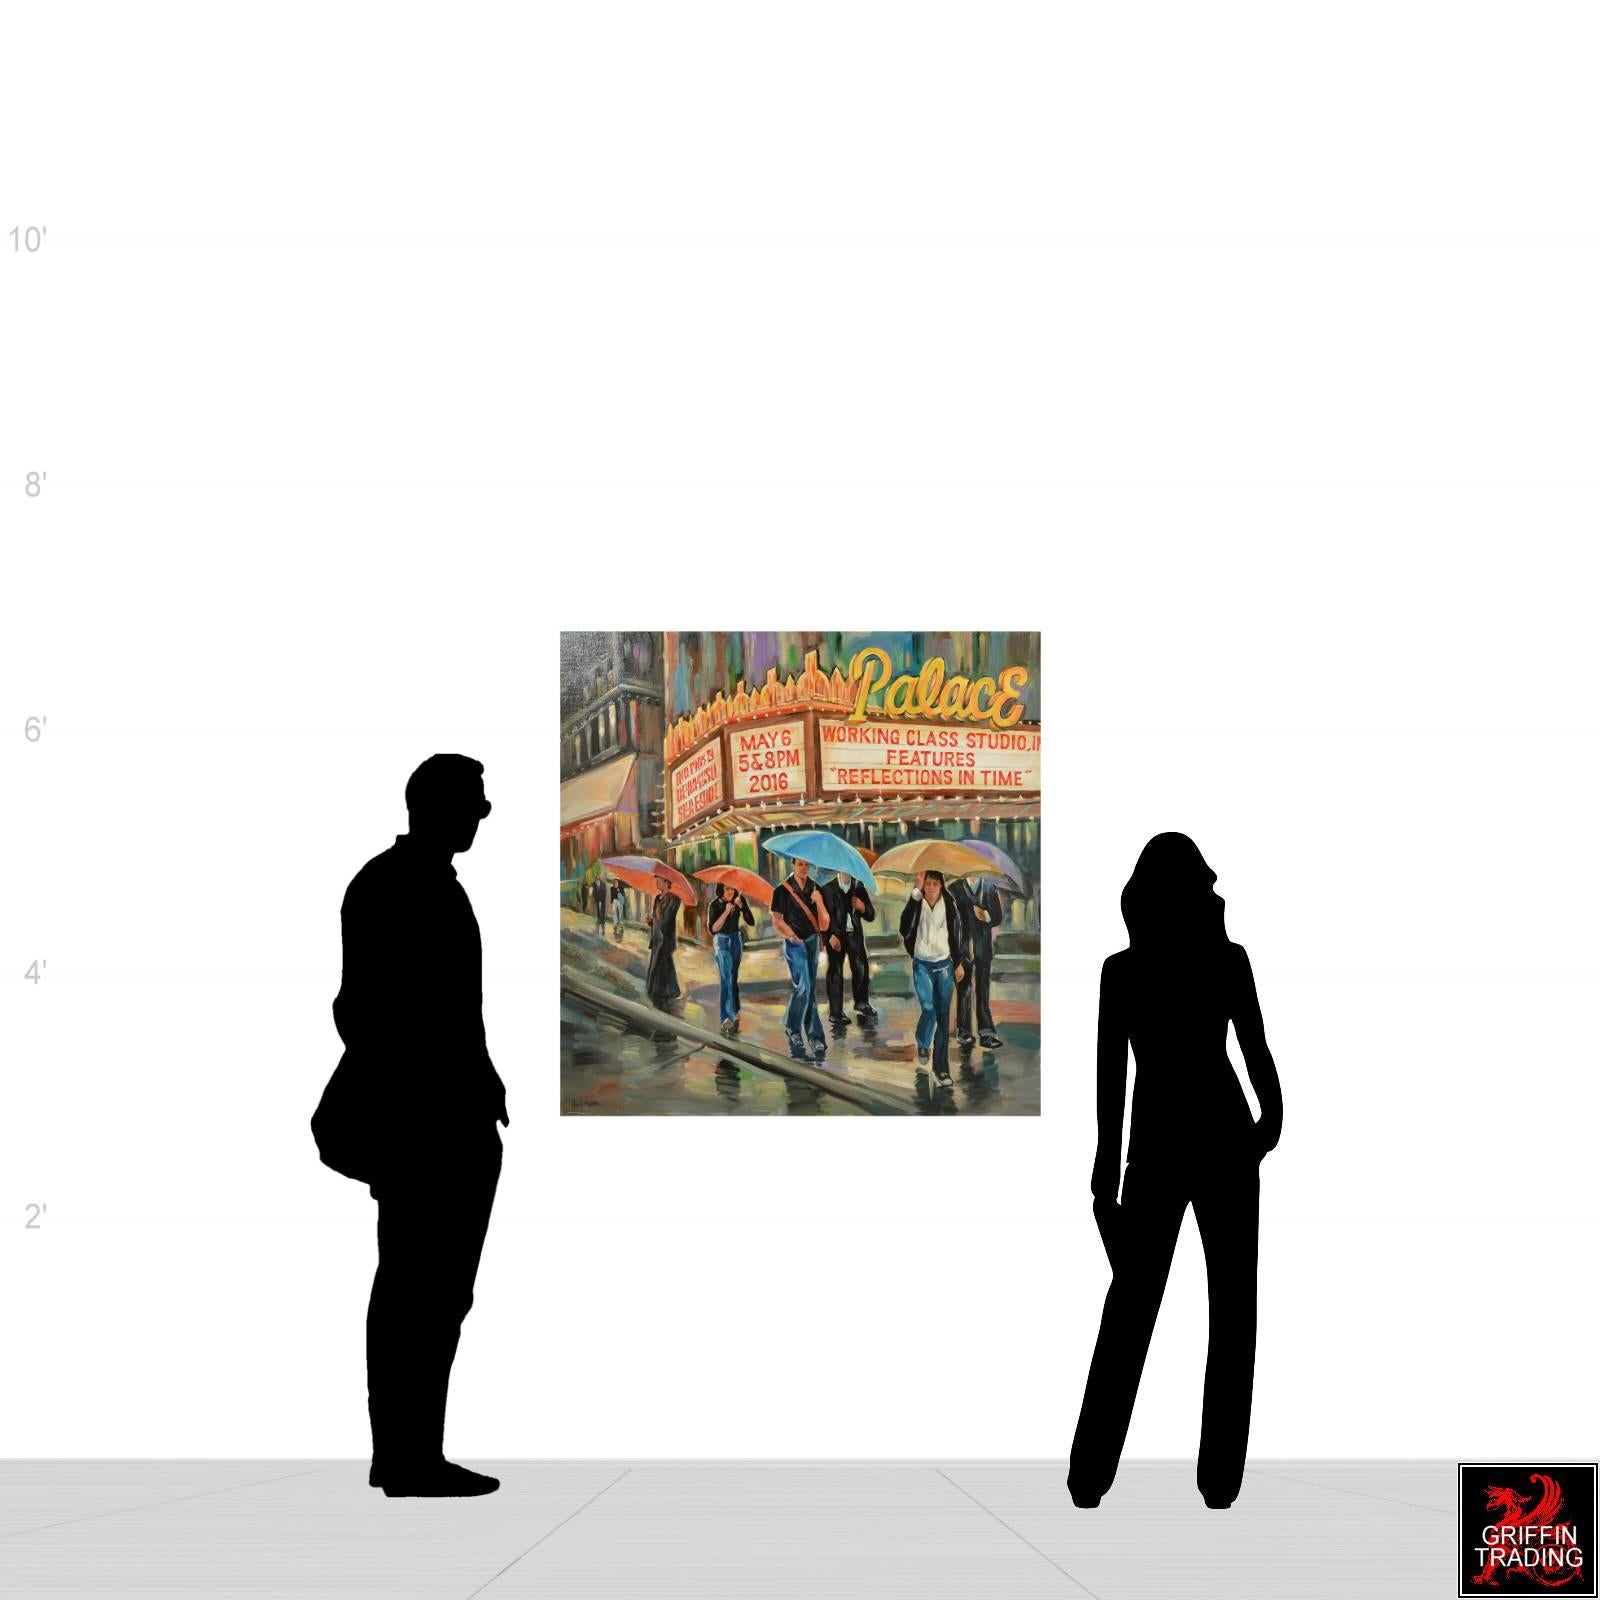 Titled palace theatre this large painting depicts a rainy street scene with people walking by a Classic movie house. Reminiscent of the days gone by, the brightly lit theatre marquee reflects on the wet sidewalk below as passers-by take shelter